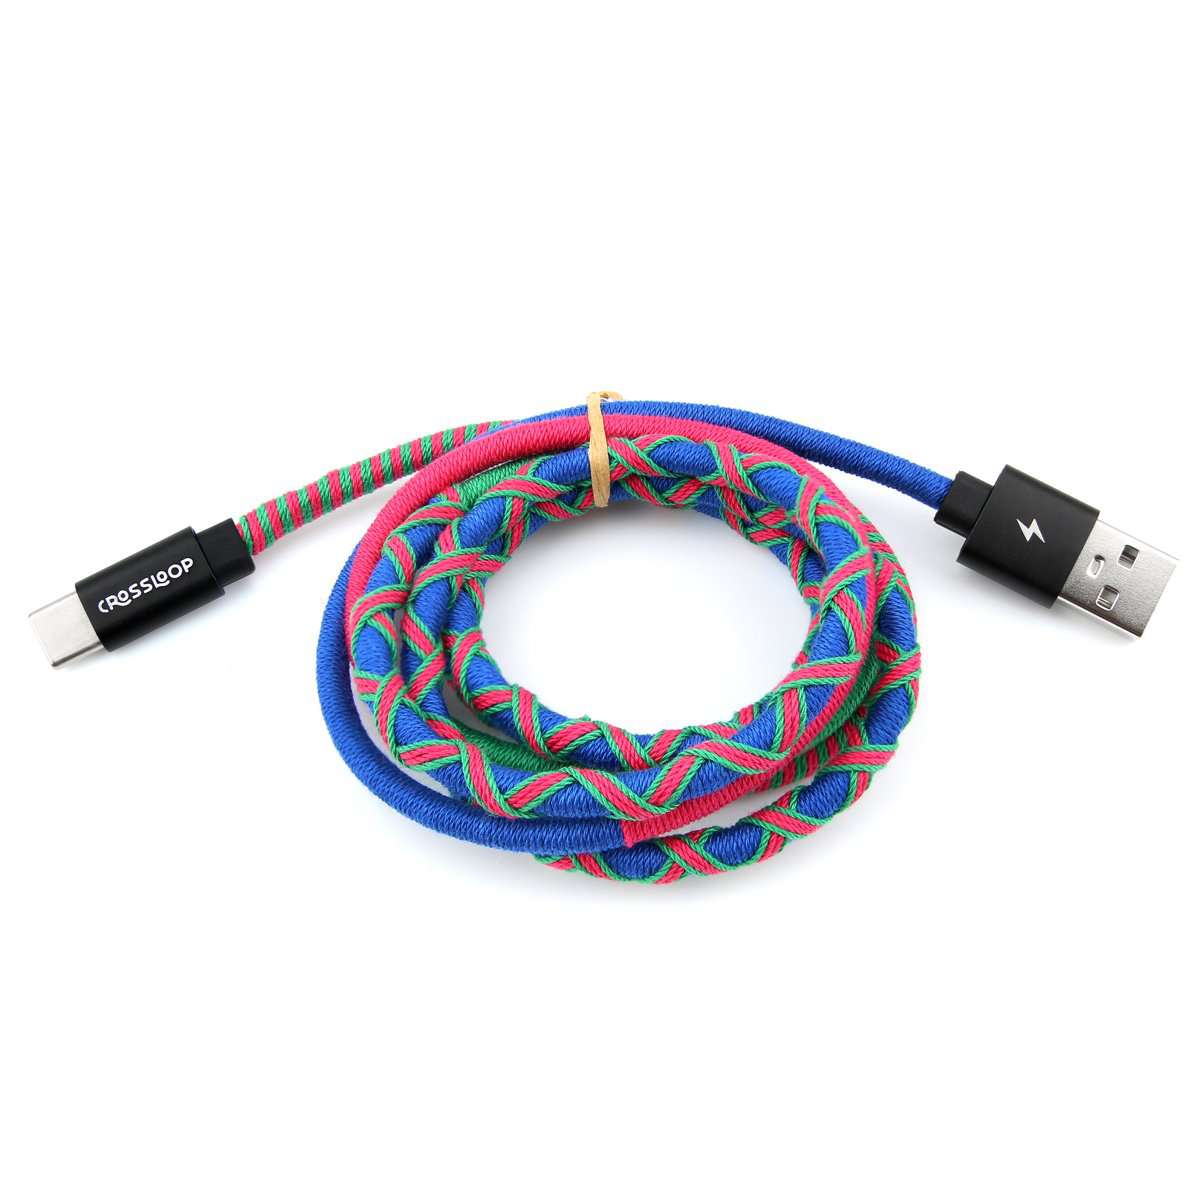 Type C Fast Charging Cable - Blue & Pink